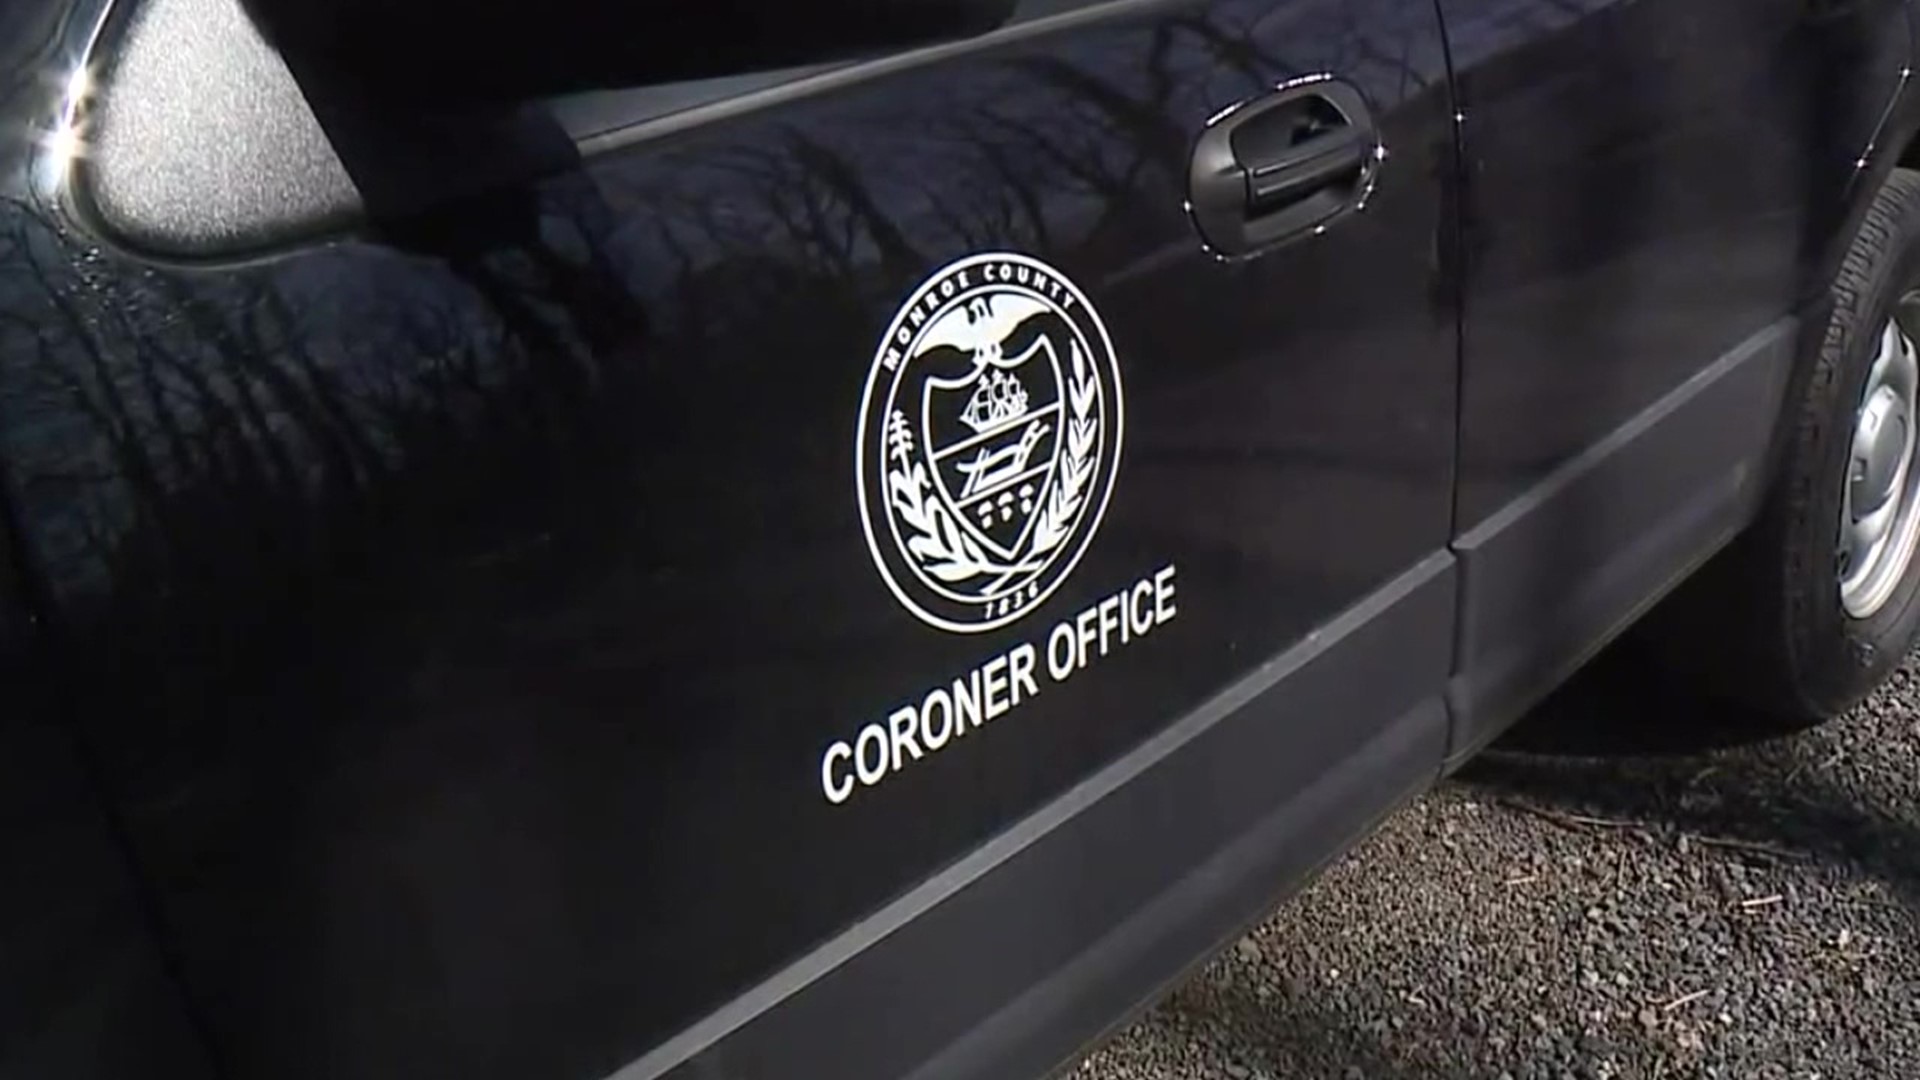 The Monroe County coroner says there has been mismanagement of the EDRS and confusing and uneducated directives by the state regarding COVID deaths.